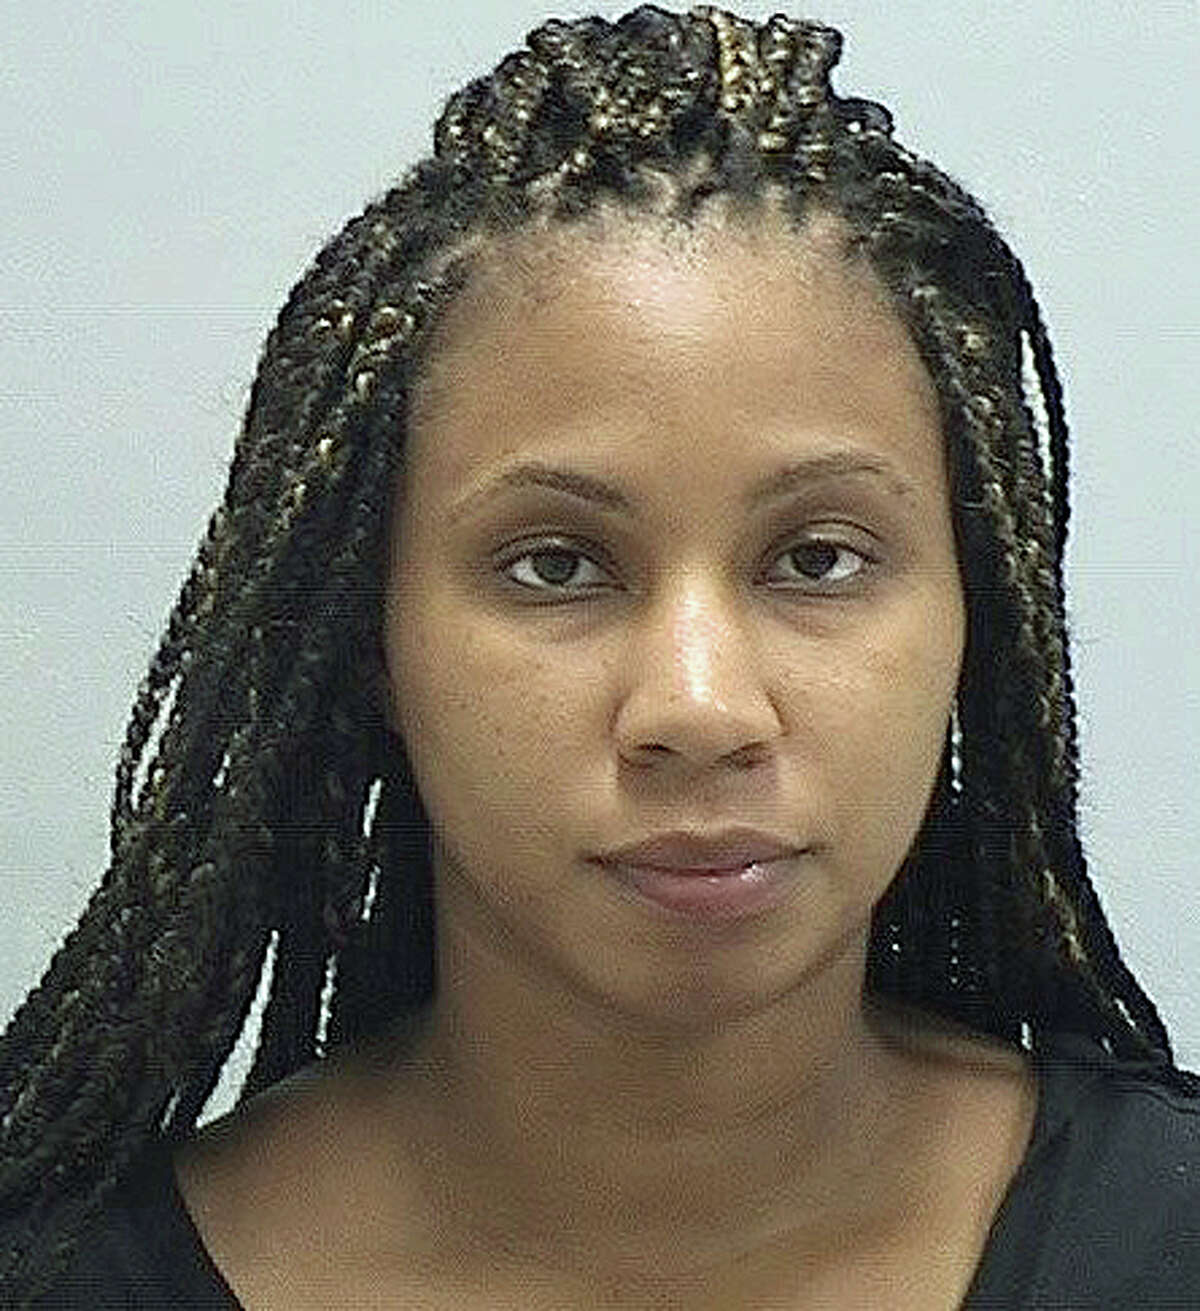 Rhonda McDougal, 32, of Mix Avenue in Hamden, was charged with third-degree assault, second-degree breach of peace the first-degree criminal trespass. Orange police said McDougal, had gotten into a disagreement with the victim over social media. The disagreement turned physical when the arrestee came to the Sam’s Club store, where the victim works, jumped behind the customer service counter, and assaulted her.